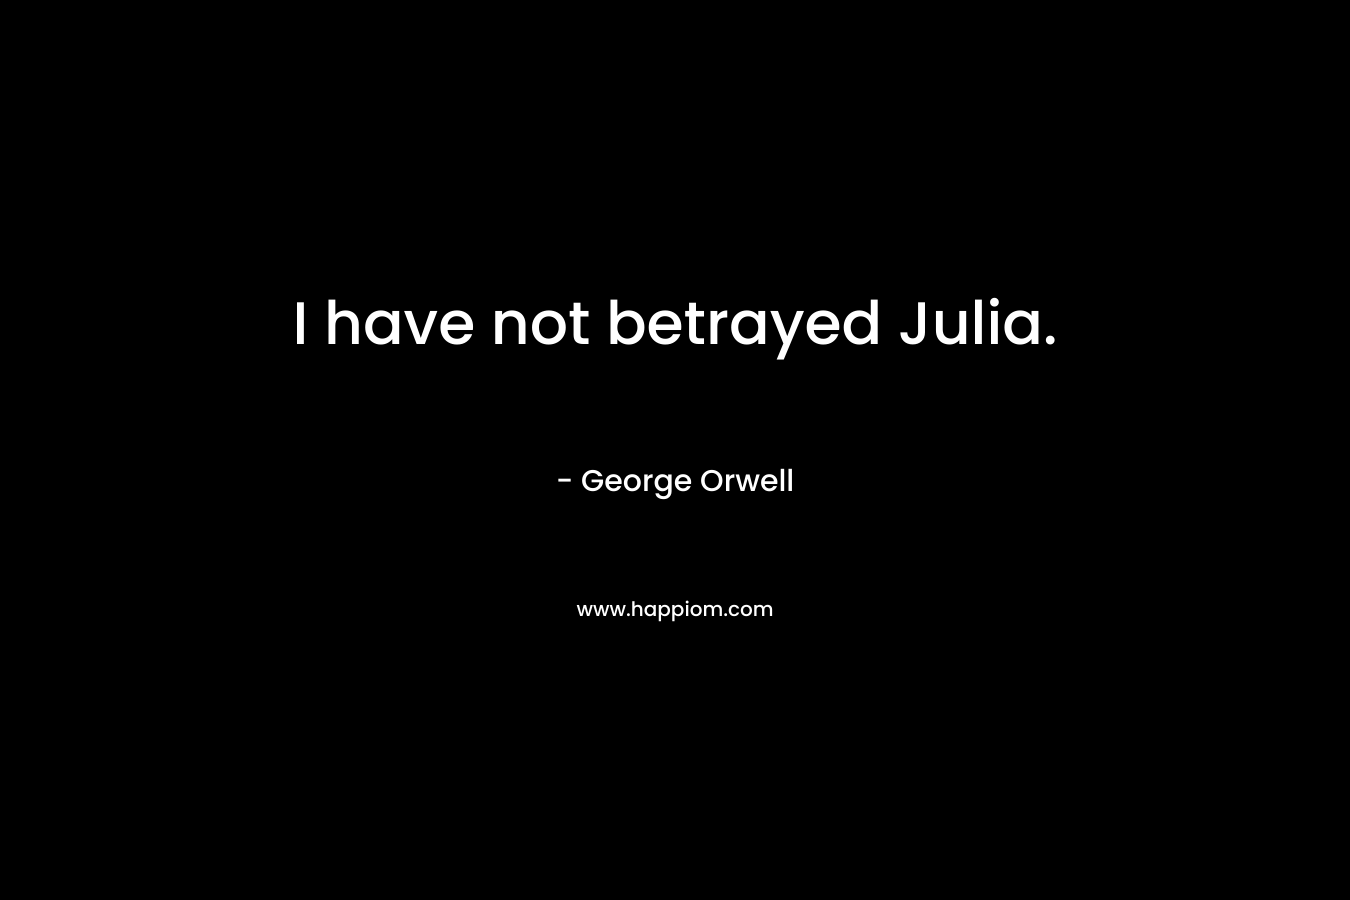 I have not betrayed Julia. – George Orwell